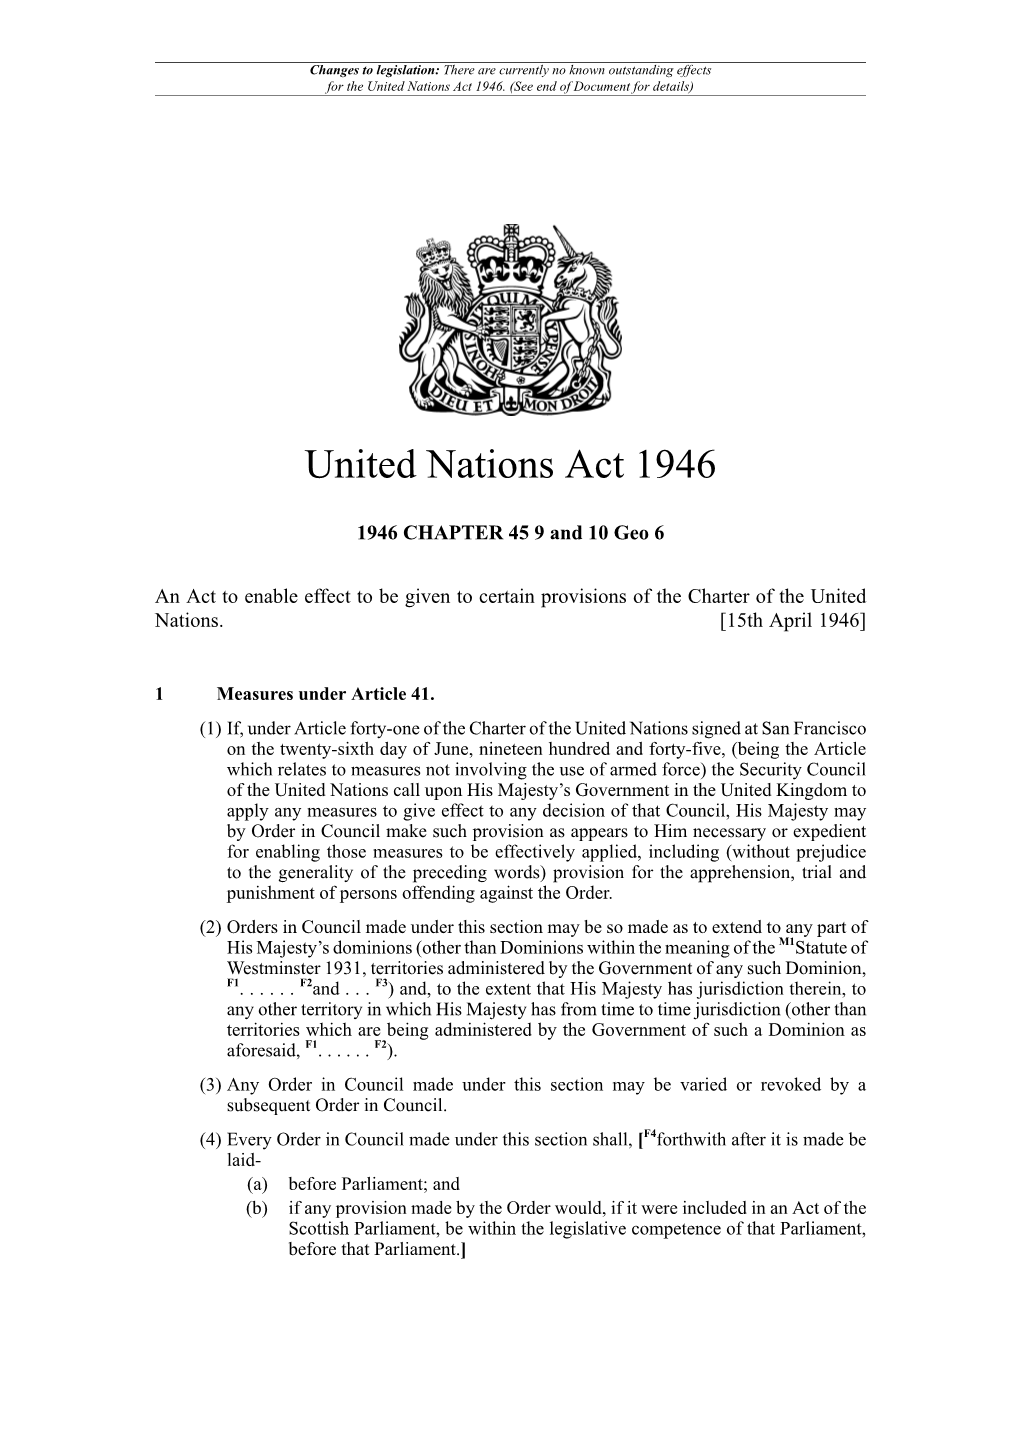 United Nations Act 1946